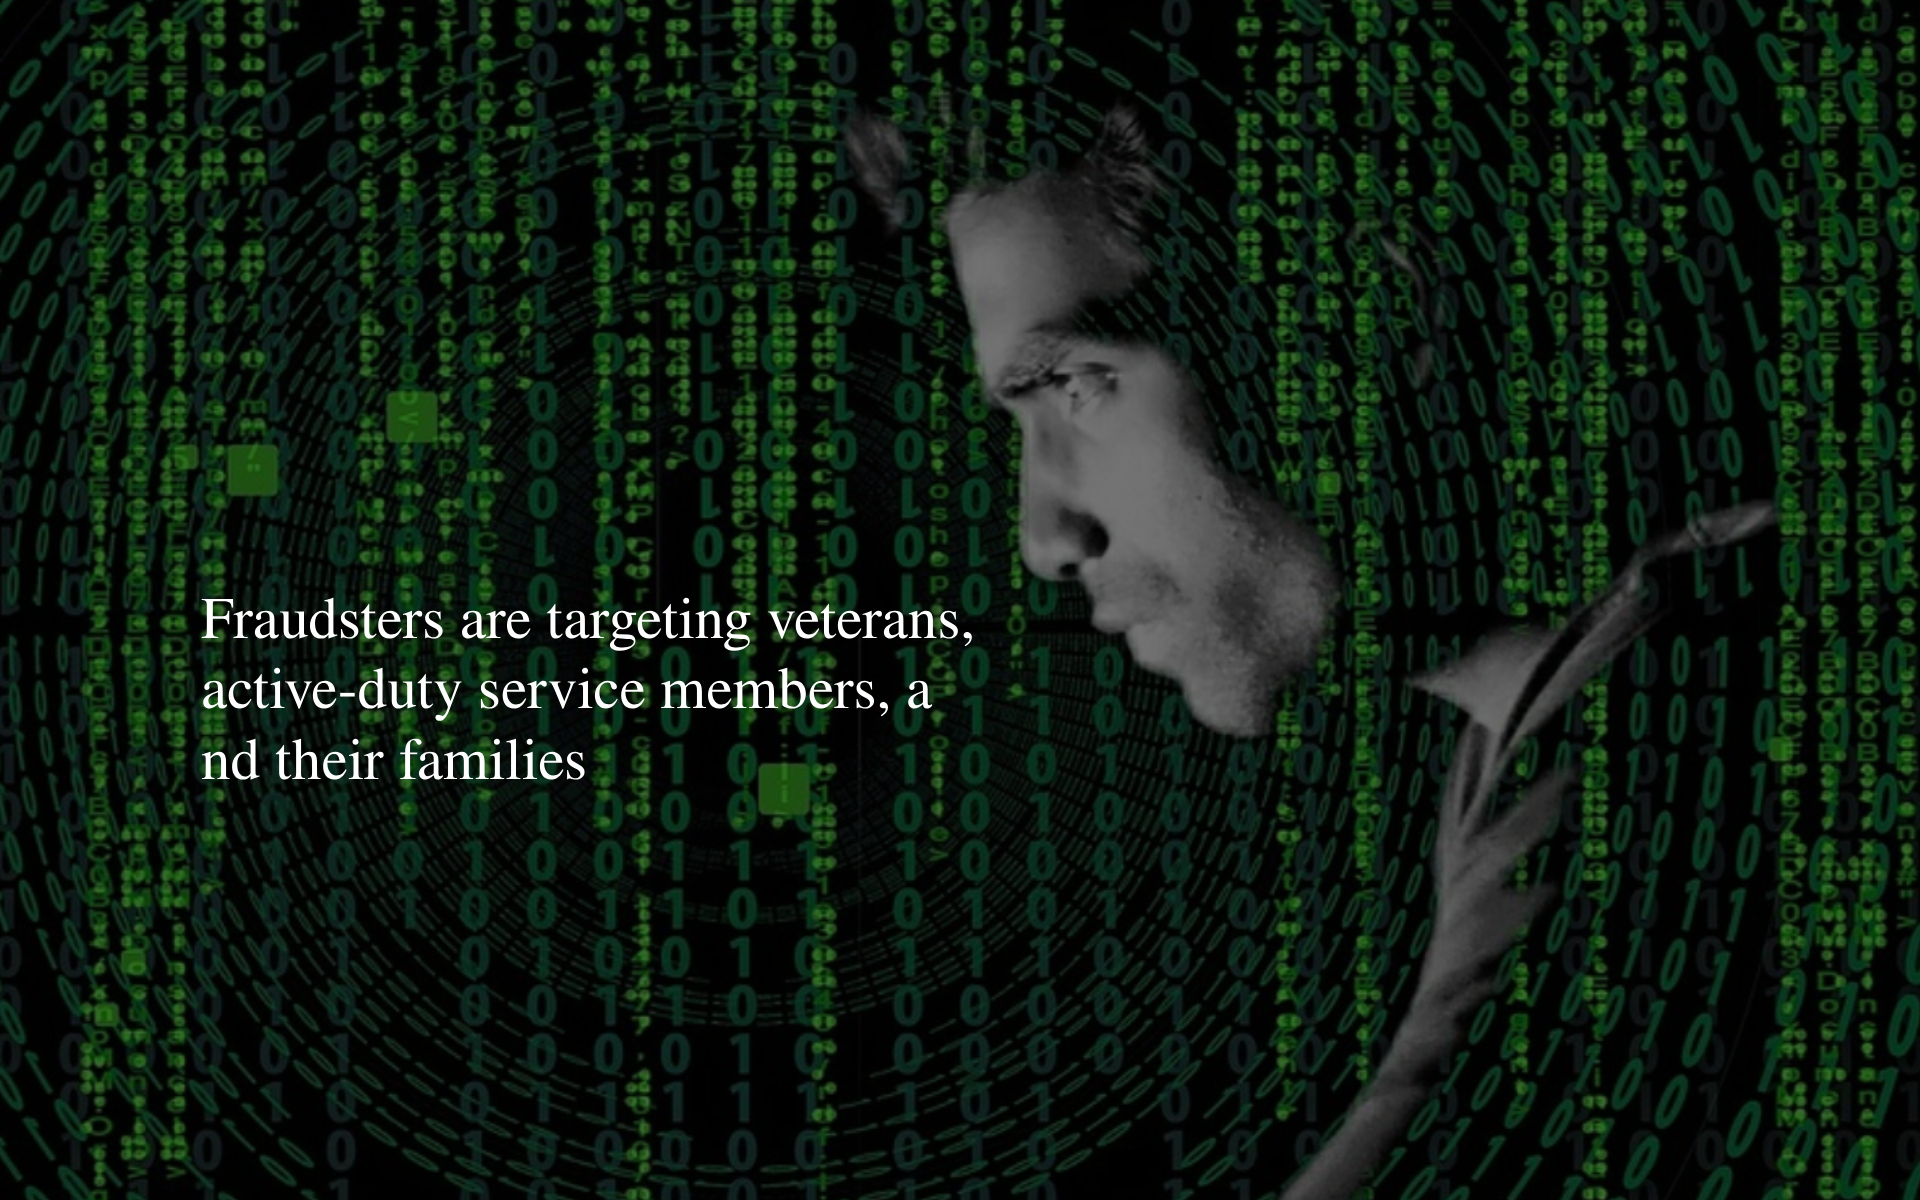 Internet fraudsters are targeting veterans, active-duty service members, and their families